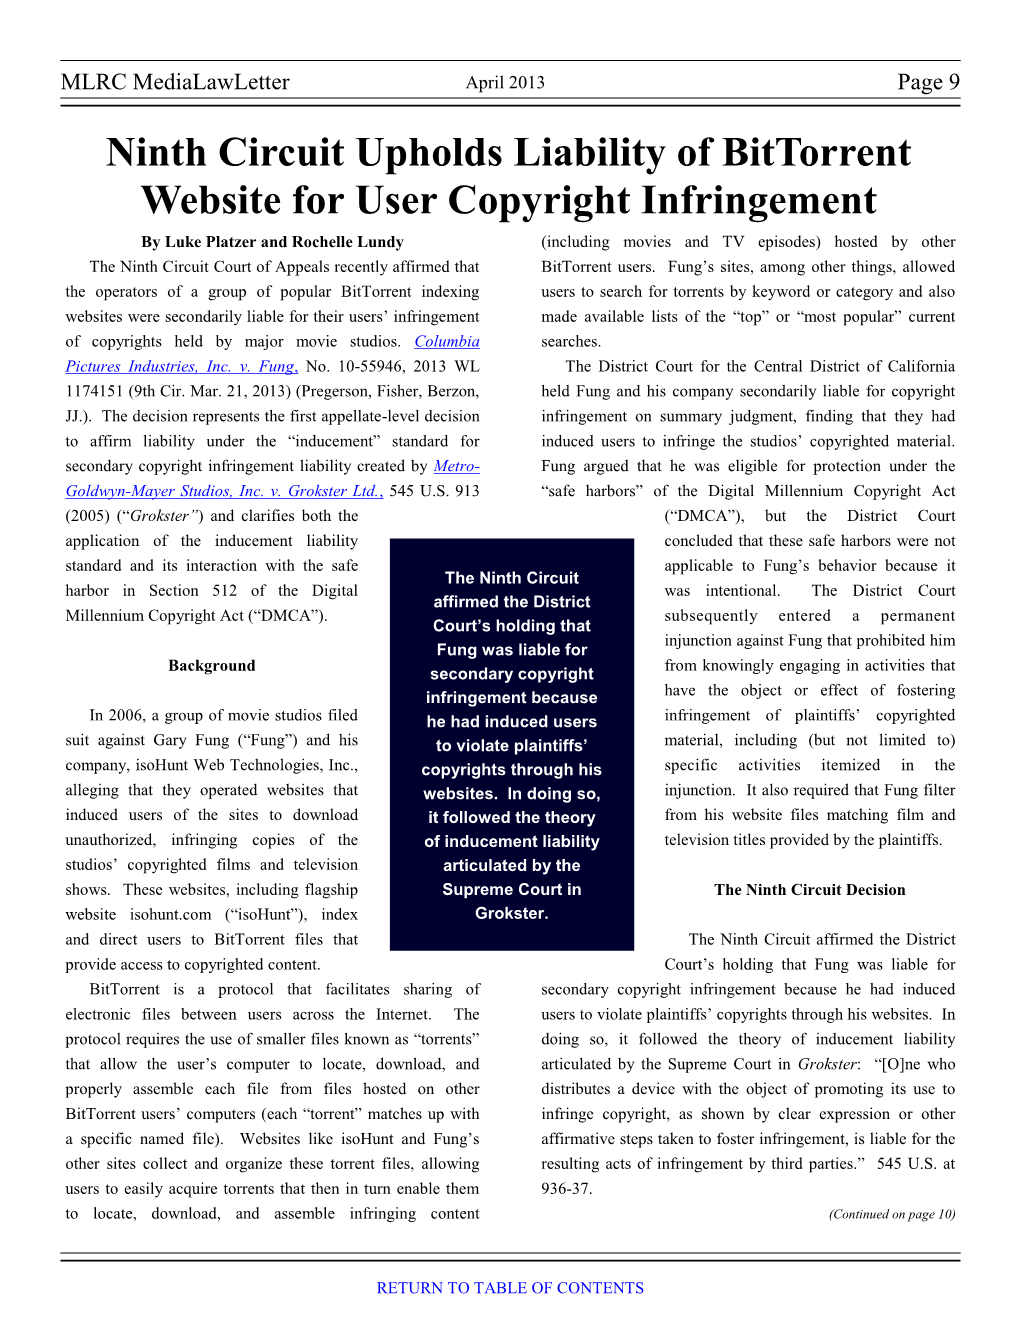 Ninth Circuit Upholds Liability of Bittorrent Website for User